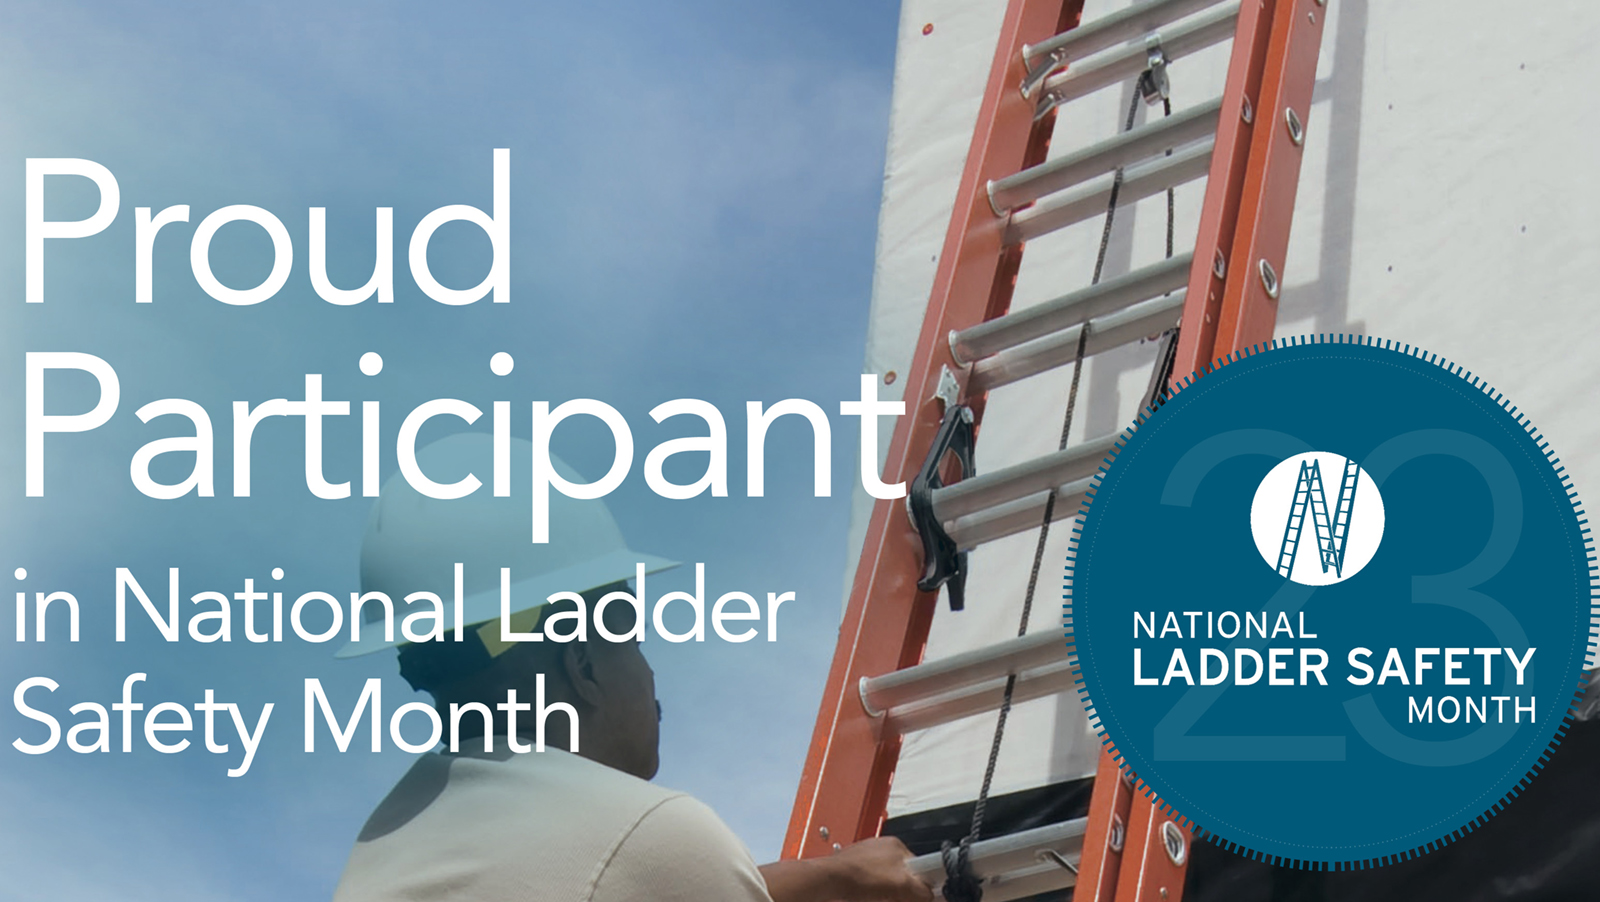 Use Ladder Safety Month to Review Your Safety Procedures NAHB